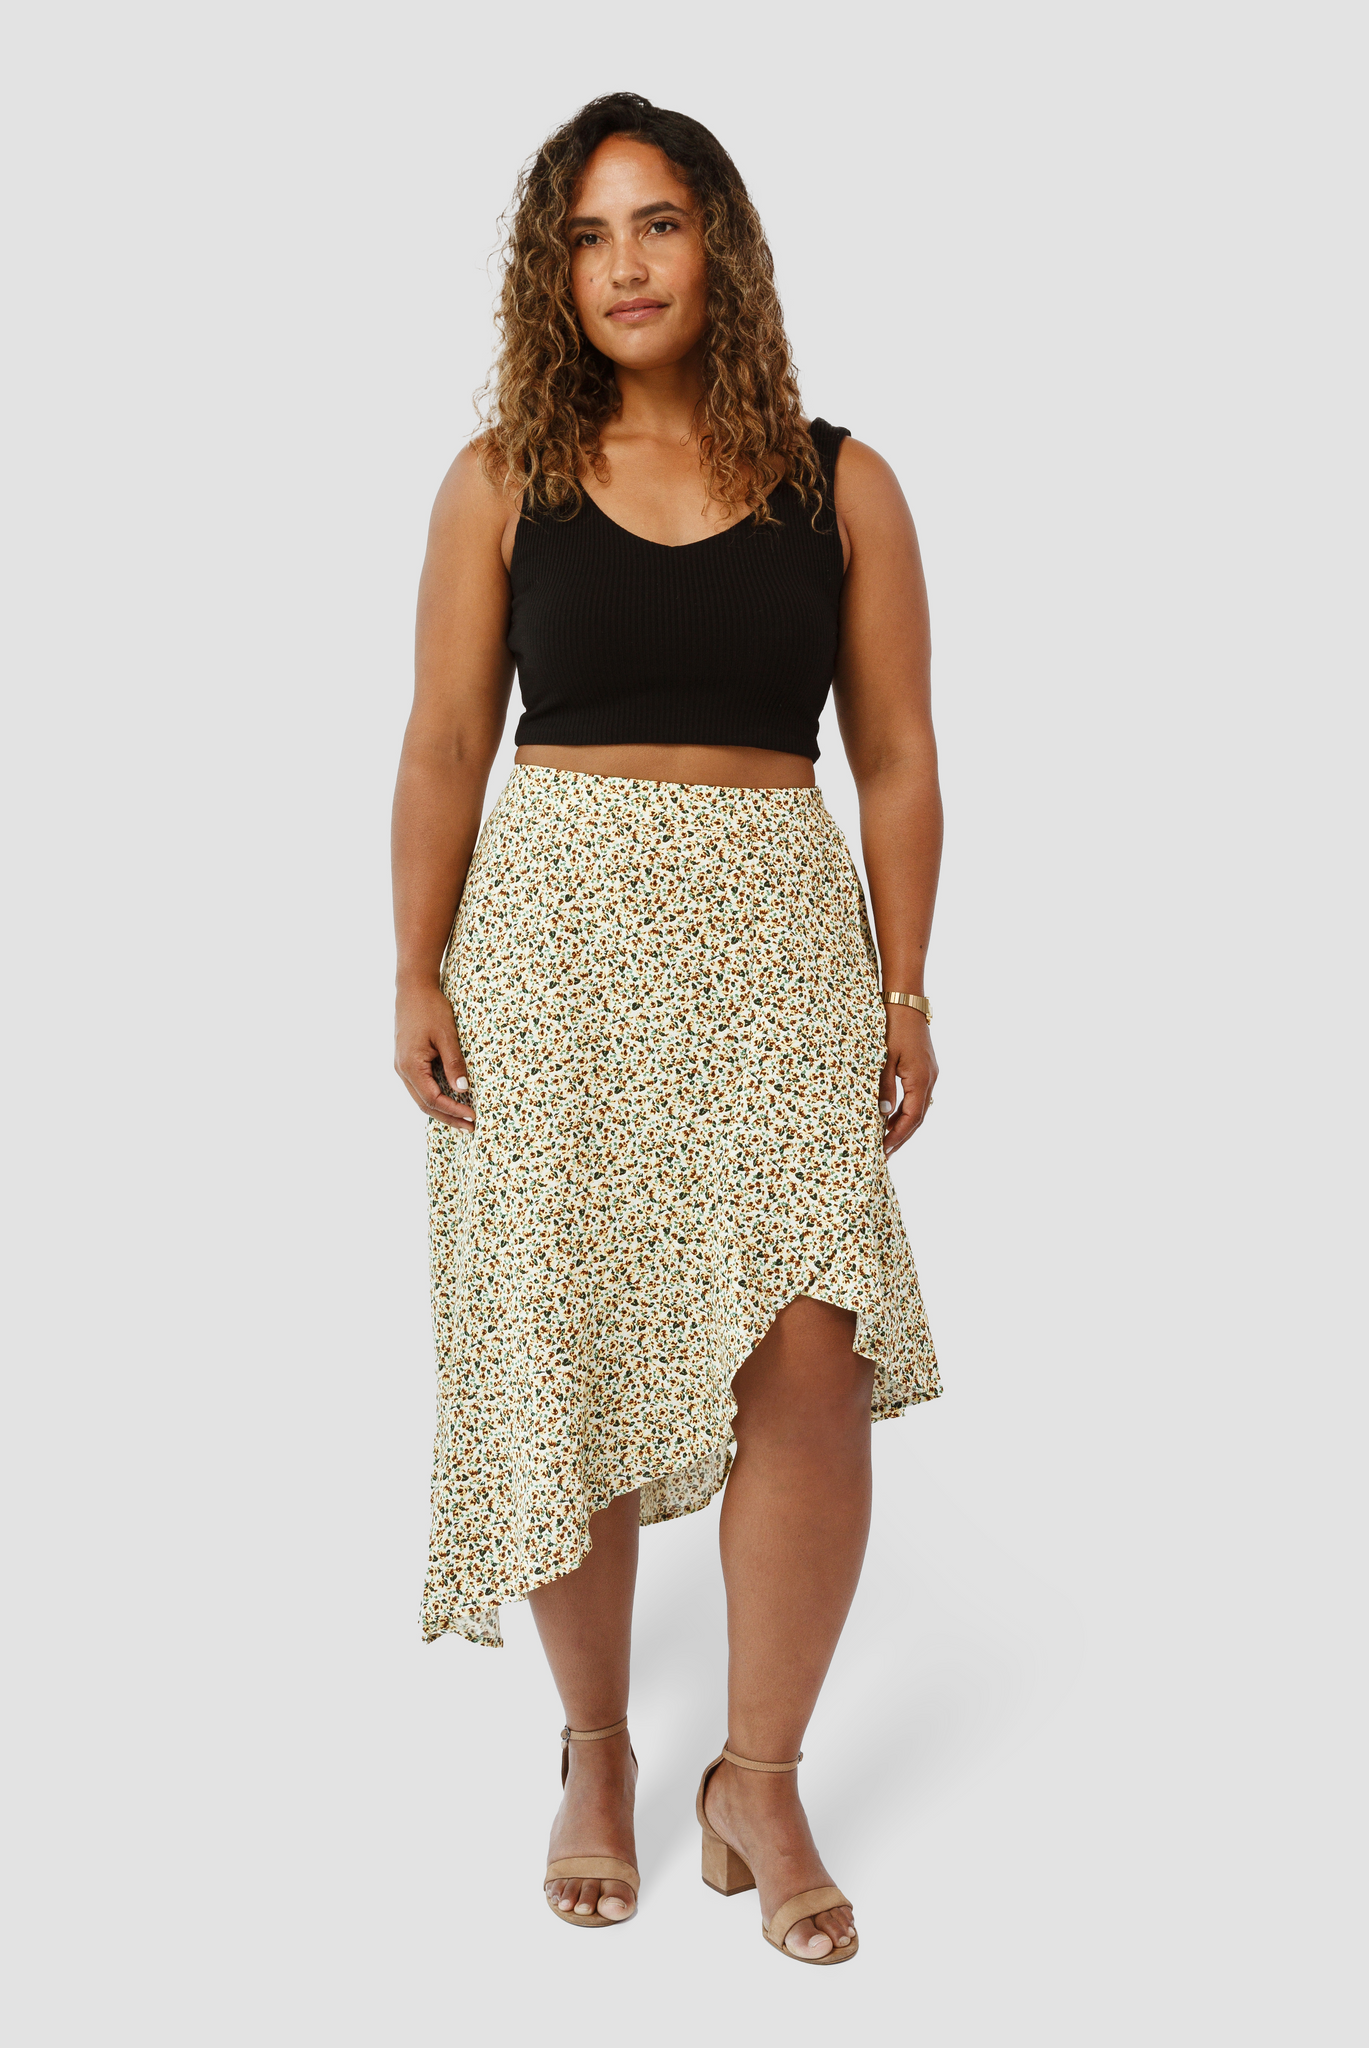 The Cascade Skirt by Aam is a universally flattering midi skirt. It sits high at the waist with more room for full hips and thighs. Shown here is the front view on a model who is 5'3" with 2" heels. She is wearing a size Large.